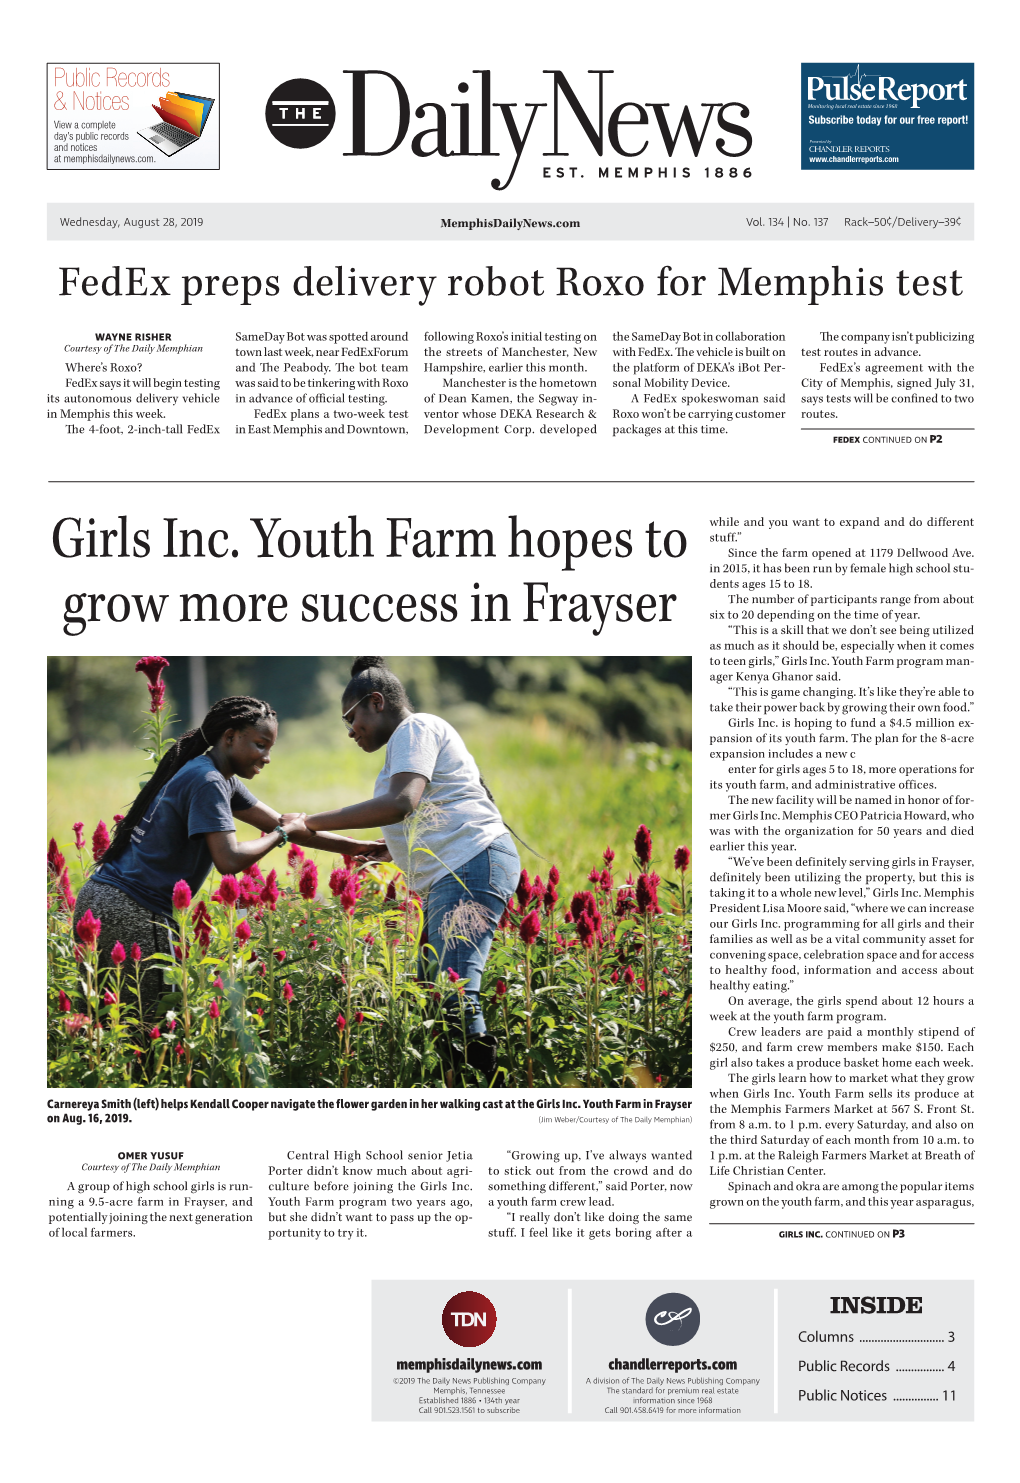 Girls Inc. Youth Farm Hopes to Grow More Success in Frayser